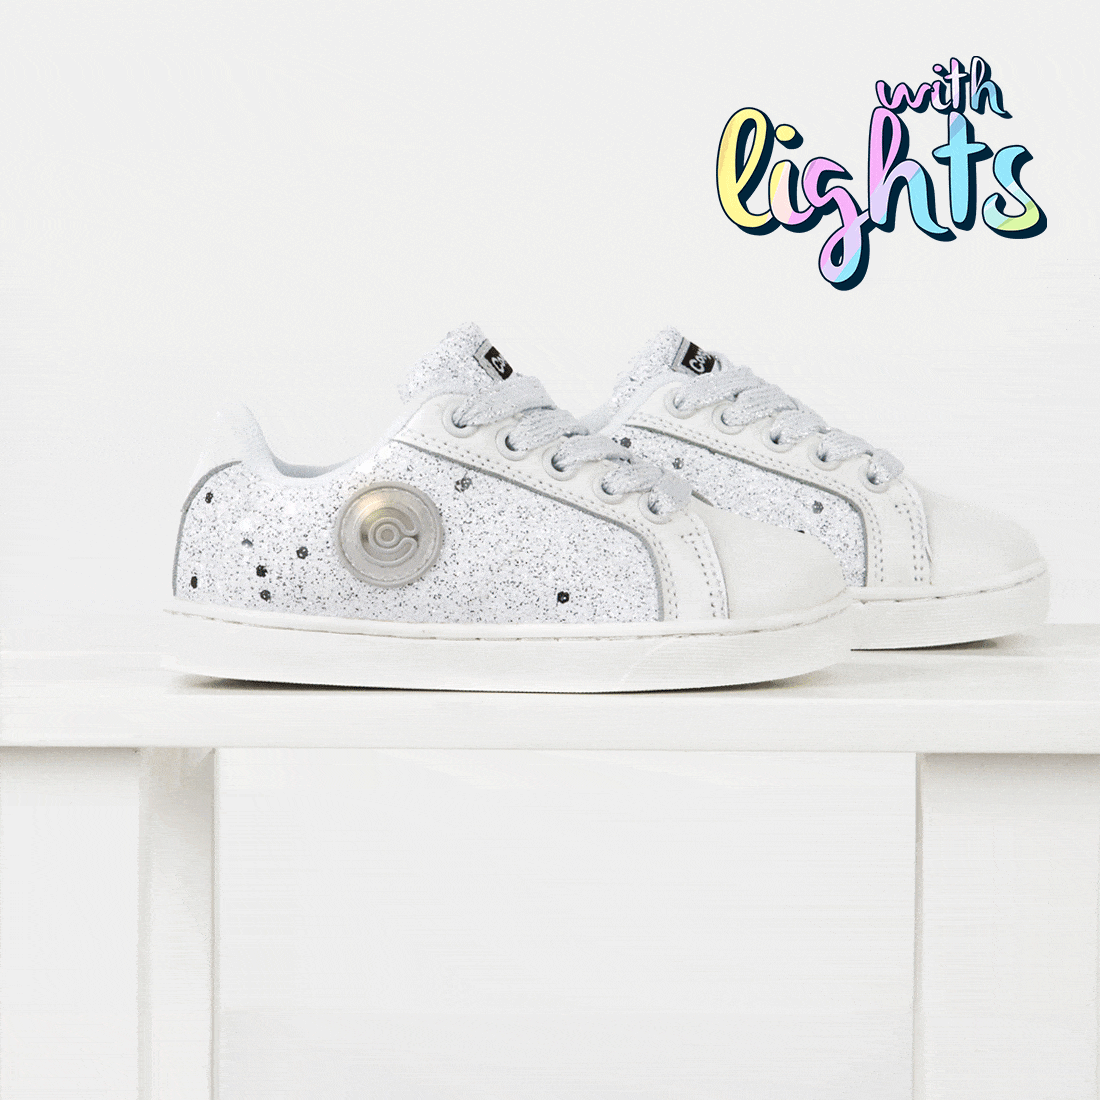 CONGUITOS Shoes Girl's White Glitter Sneakers with Lights